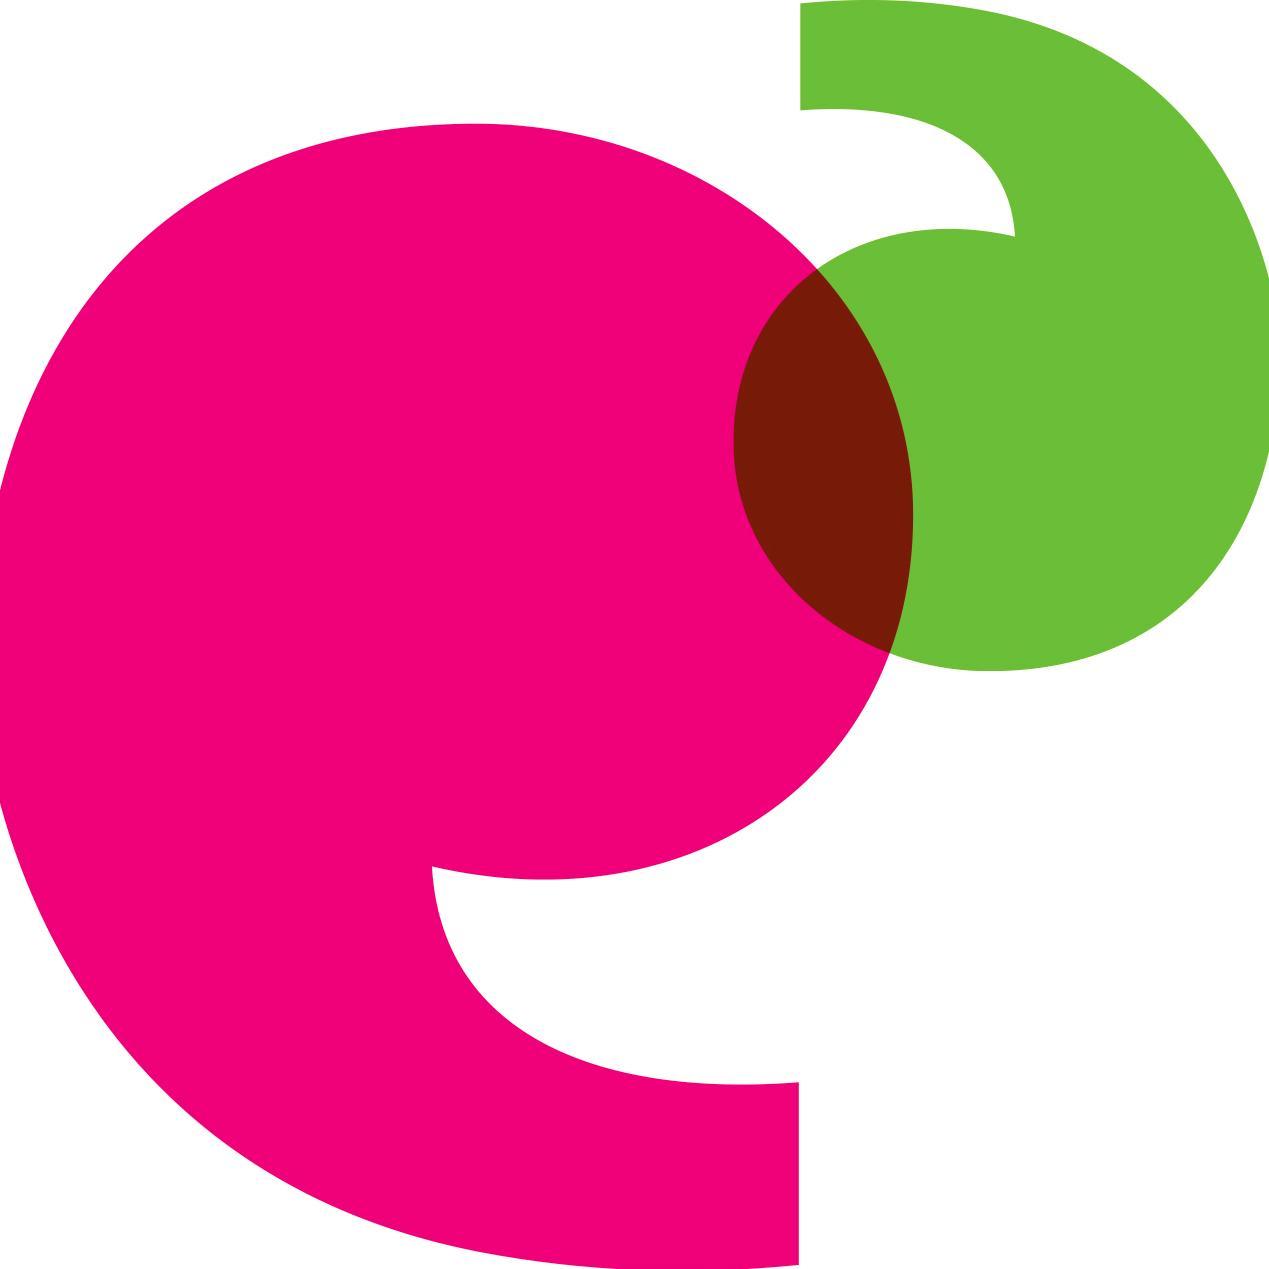 Healthwatch #Croydon is the local champion for better #health  and #socialcare services, influencing decision-making in response to the resident's voice.